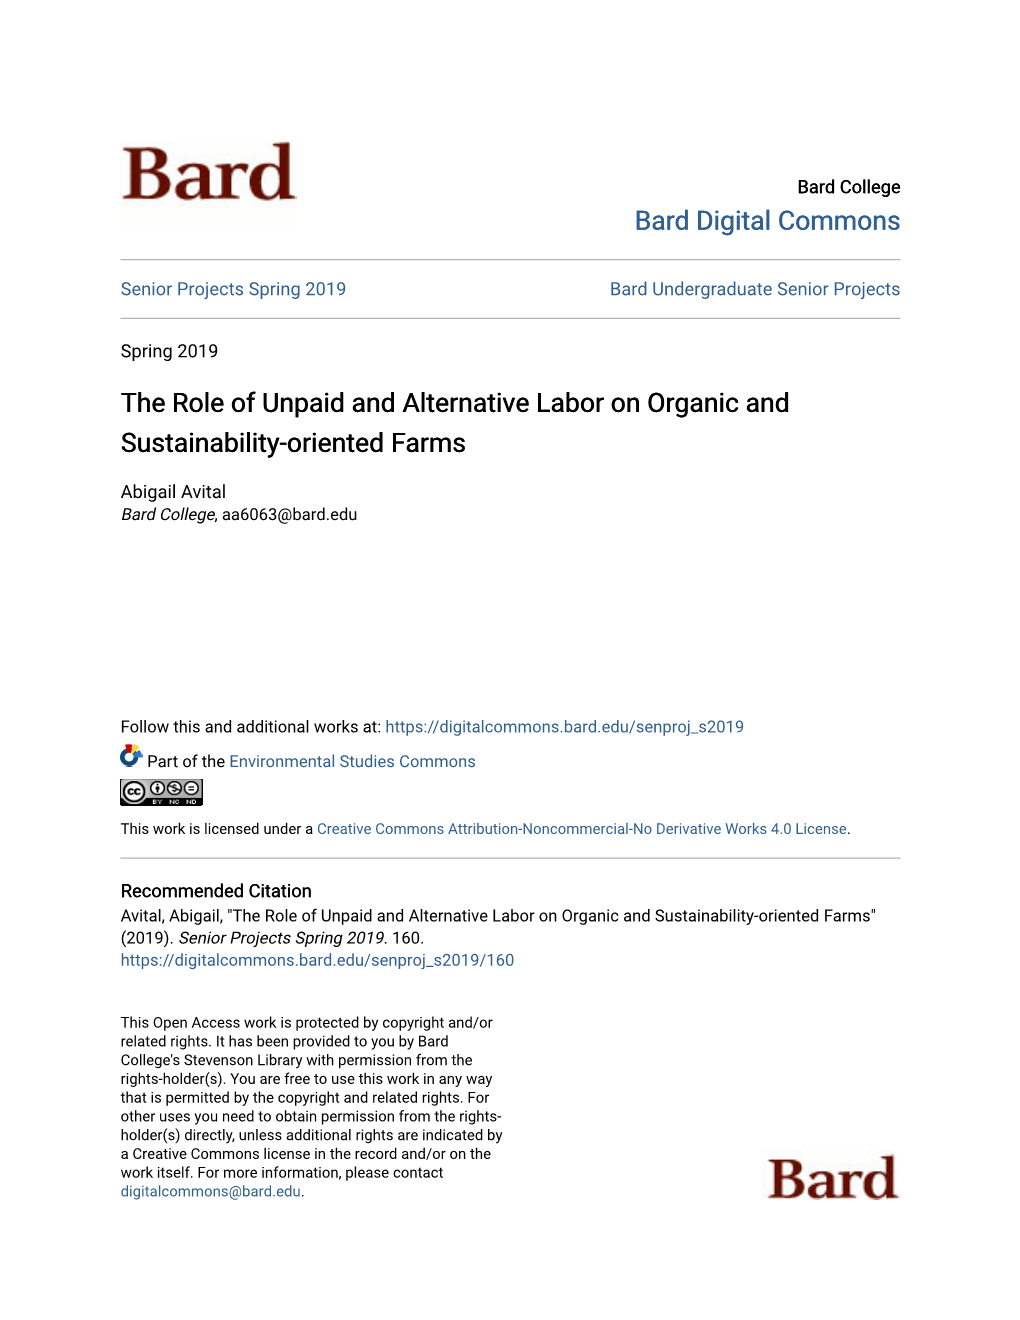 The Role of Unpaid and Alternative Labor on Organic and Sustainability-Oriented Farms